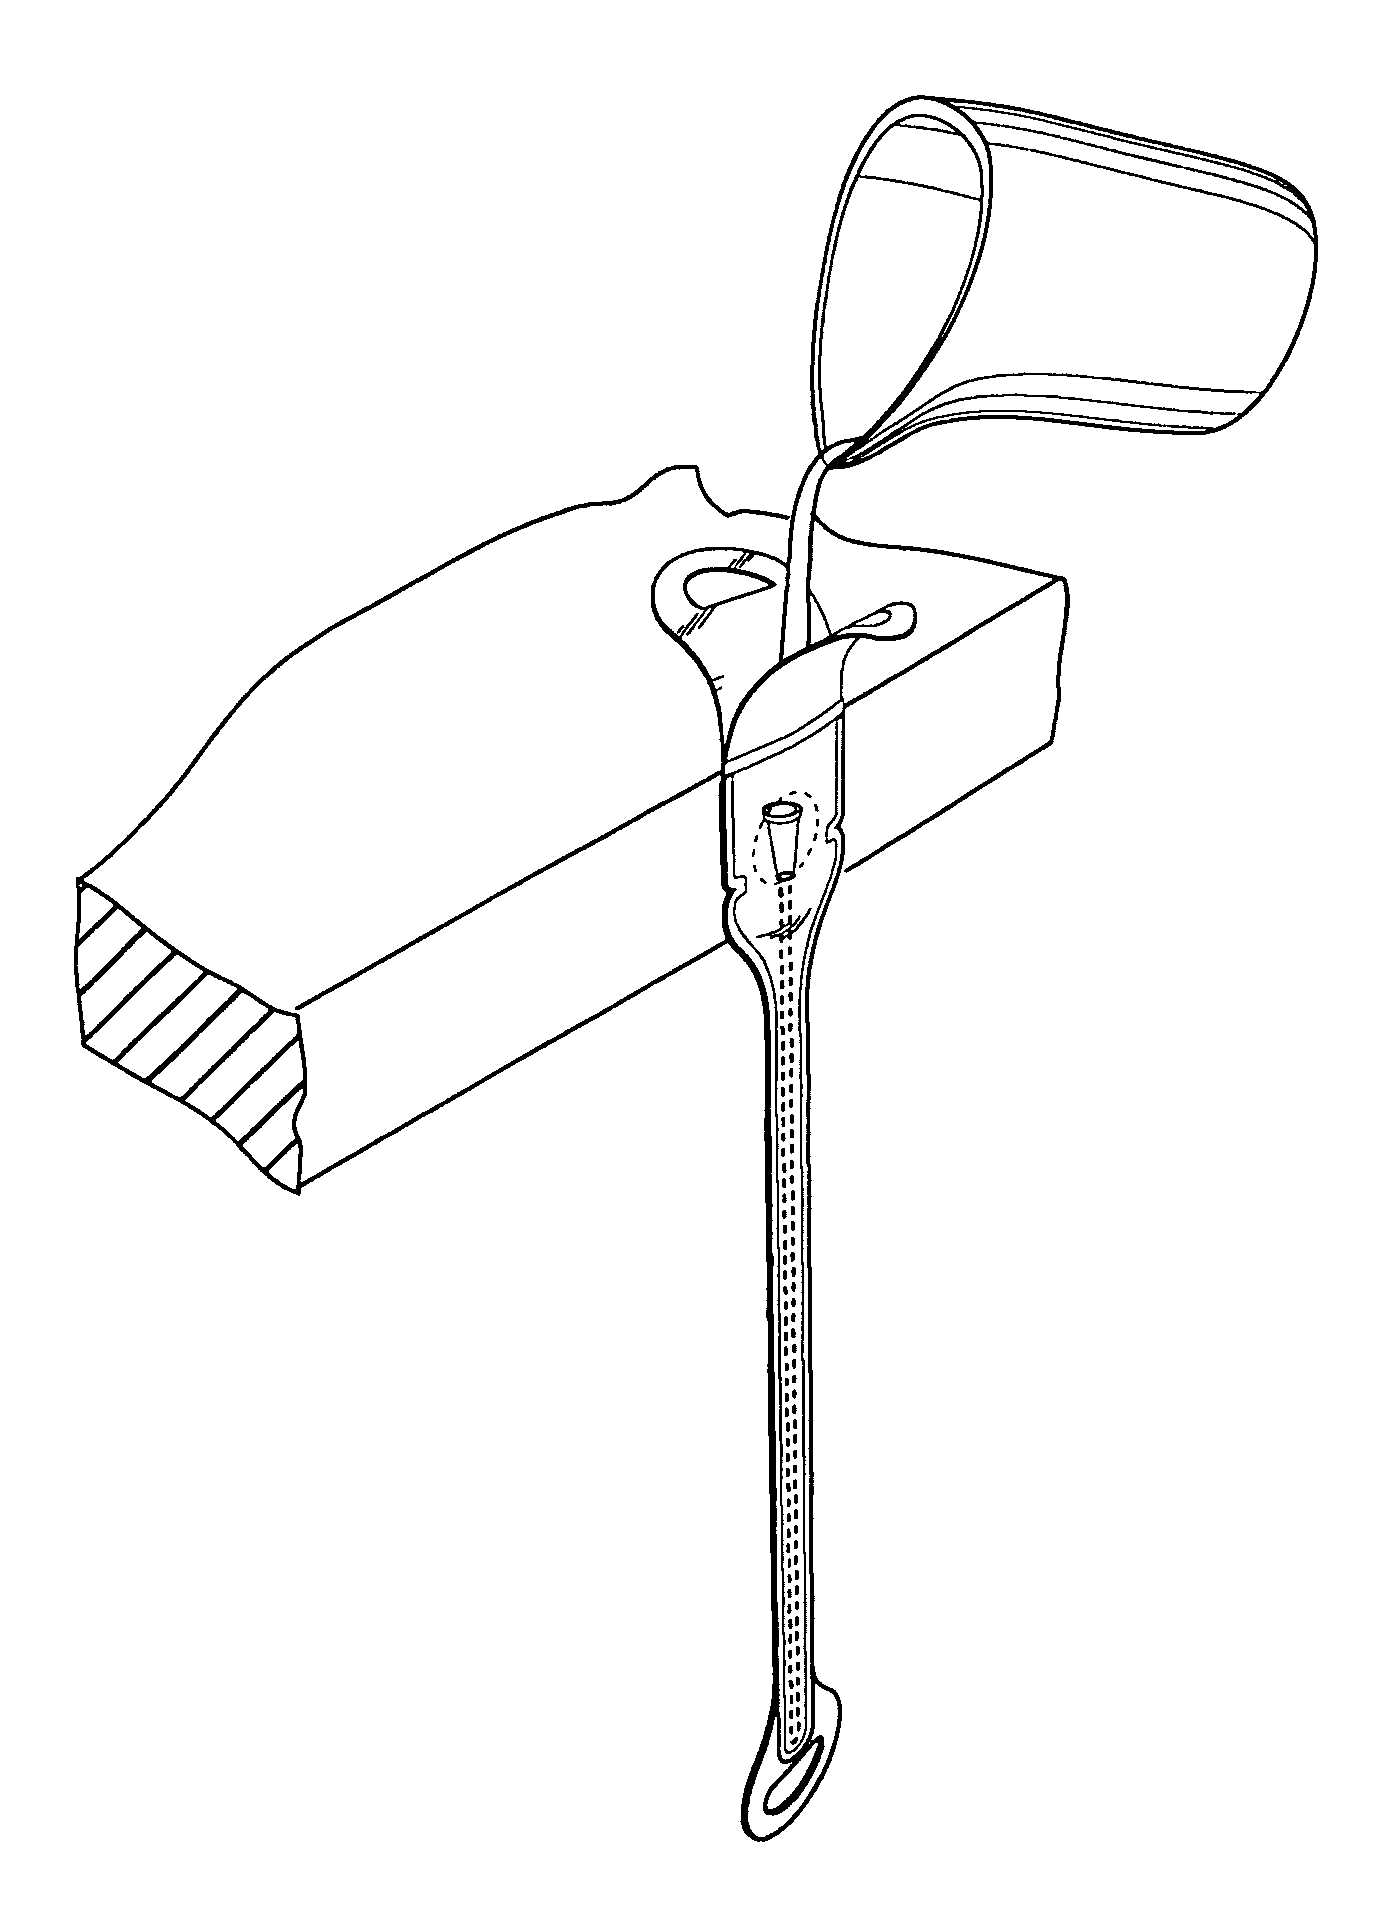 Folded catheter assembly with adhesive grip